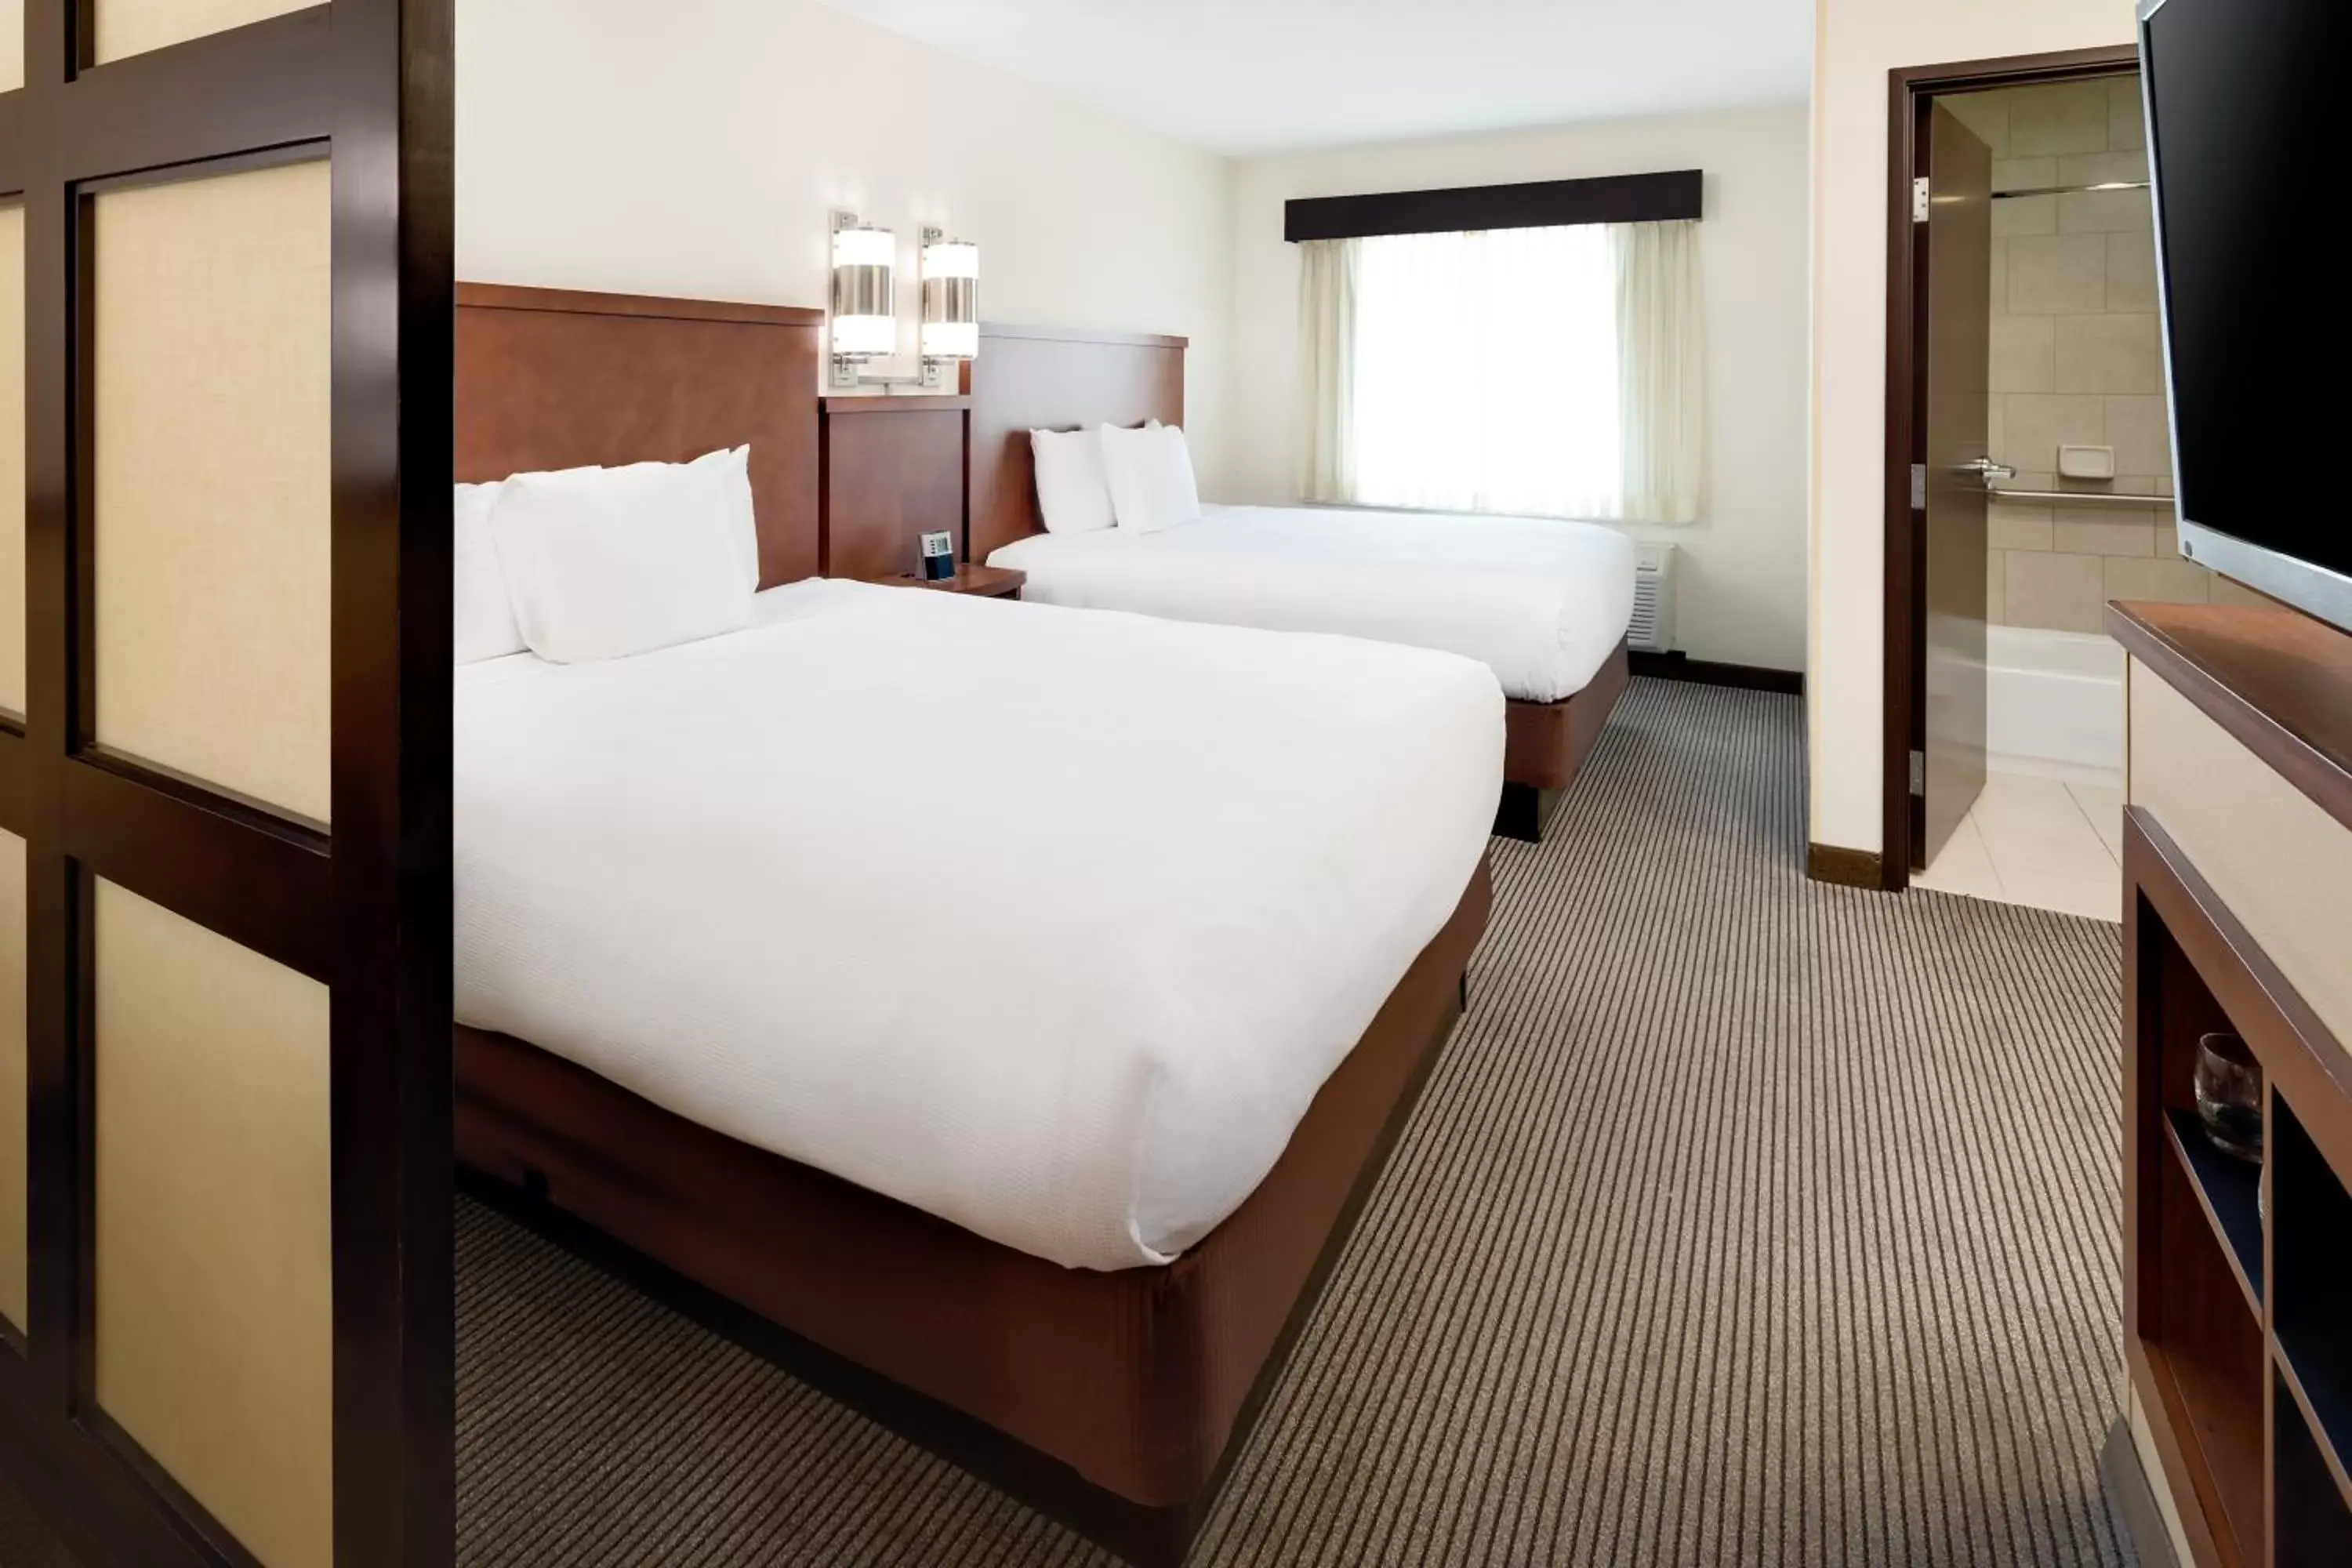 Queen Room with Two Queen Beds and Sofa Bed - High Floor in Hyatt Place South Bend/Mishawaka